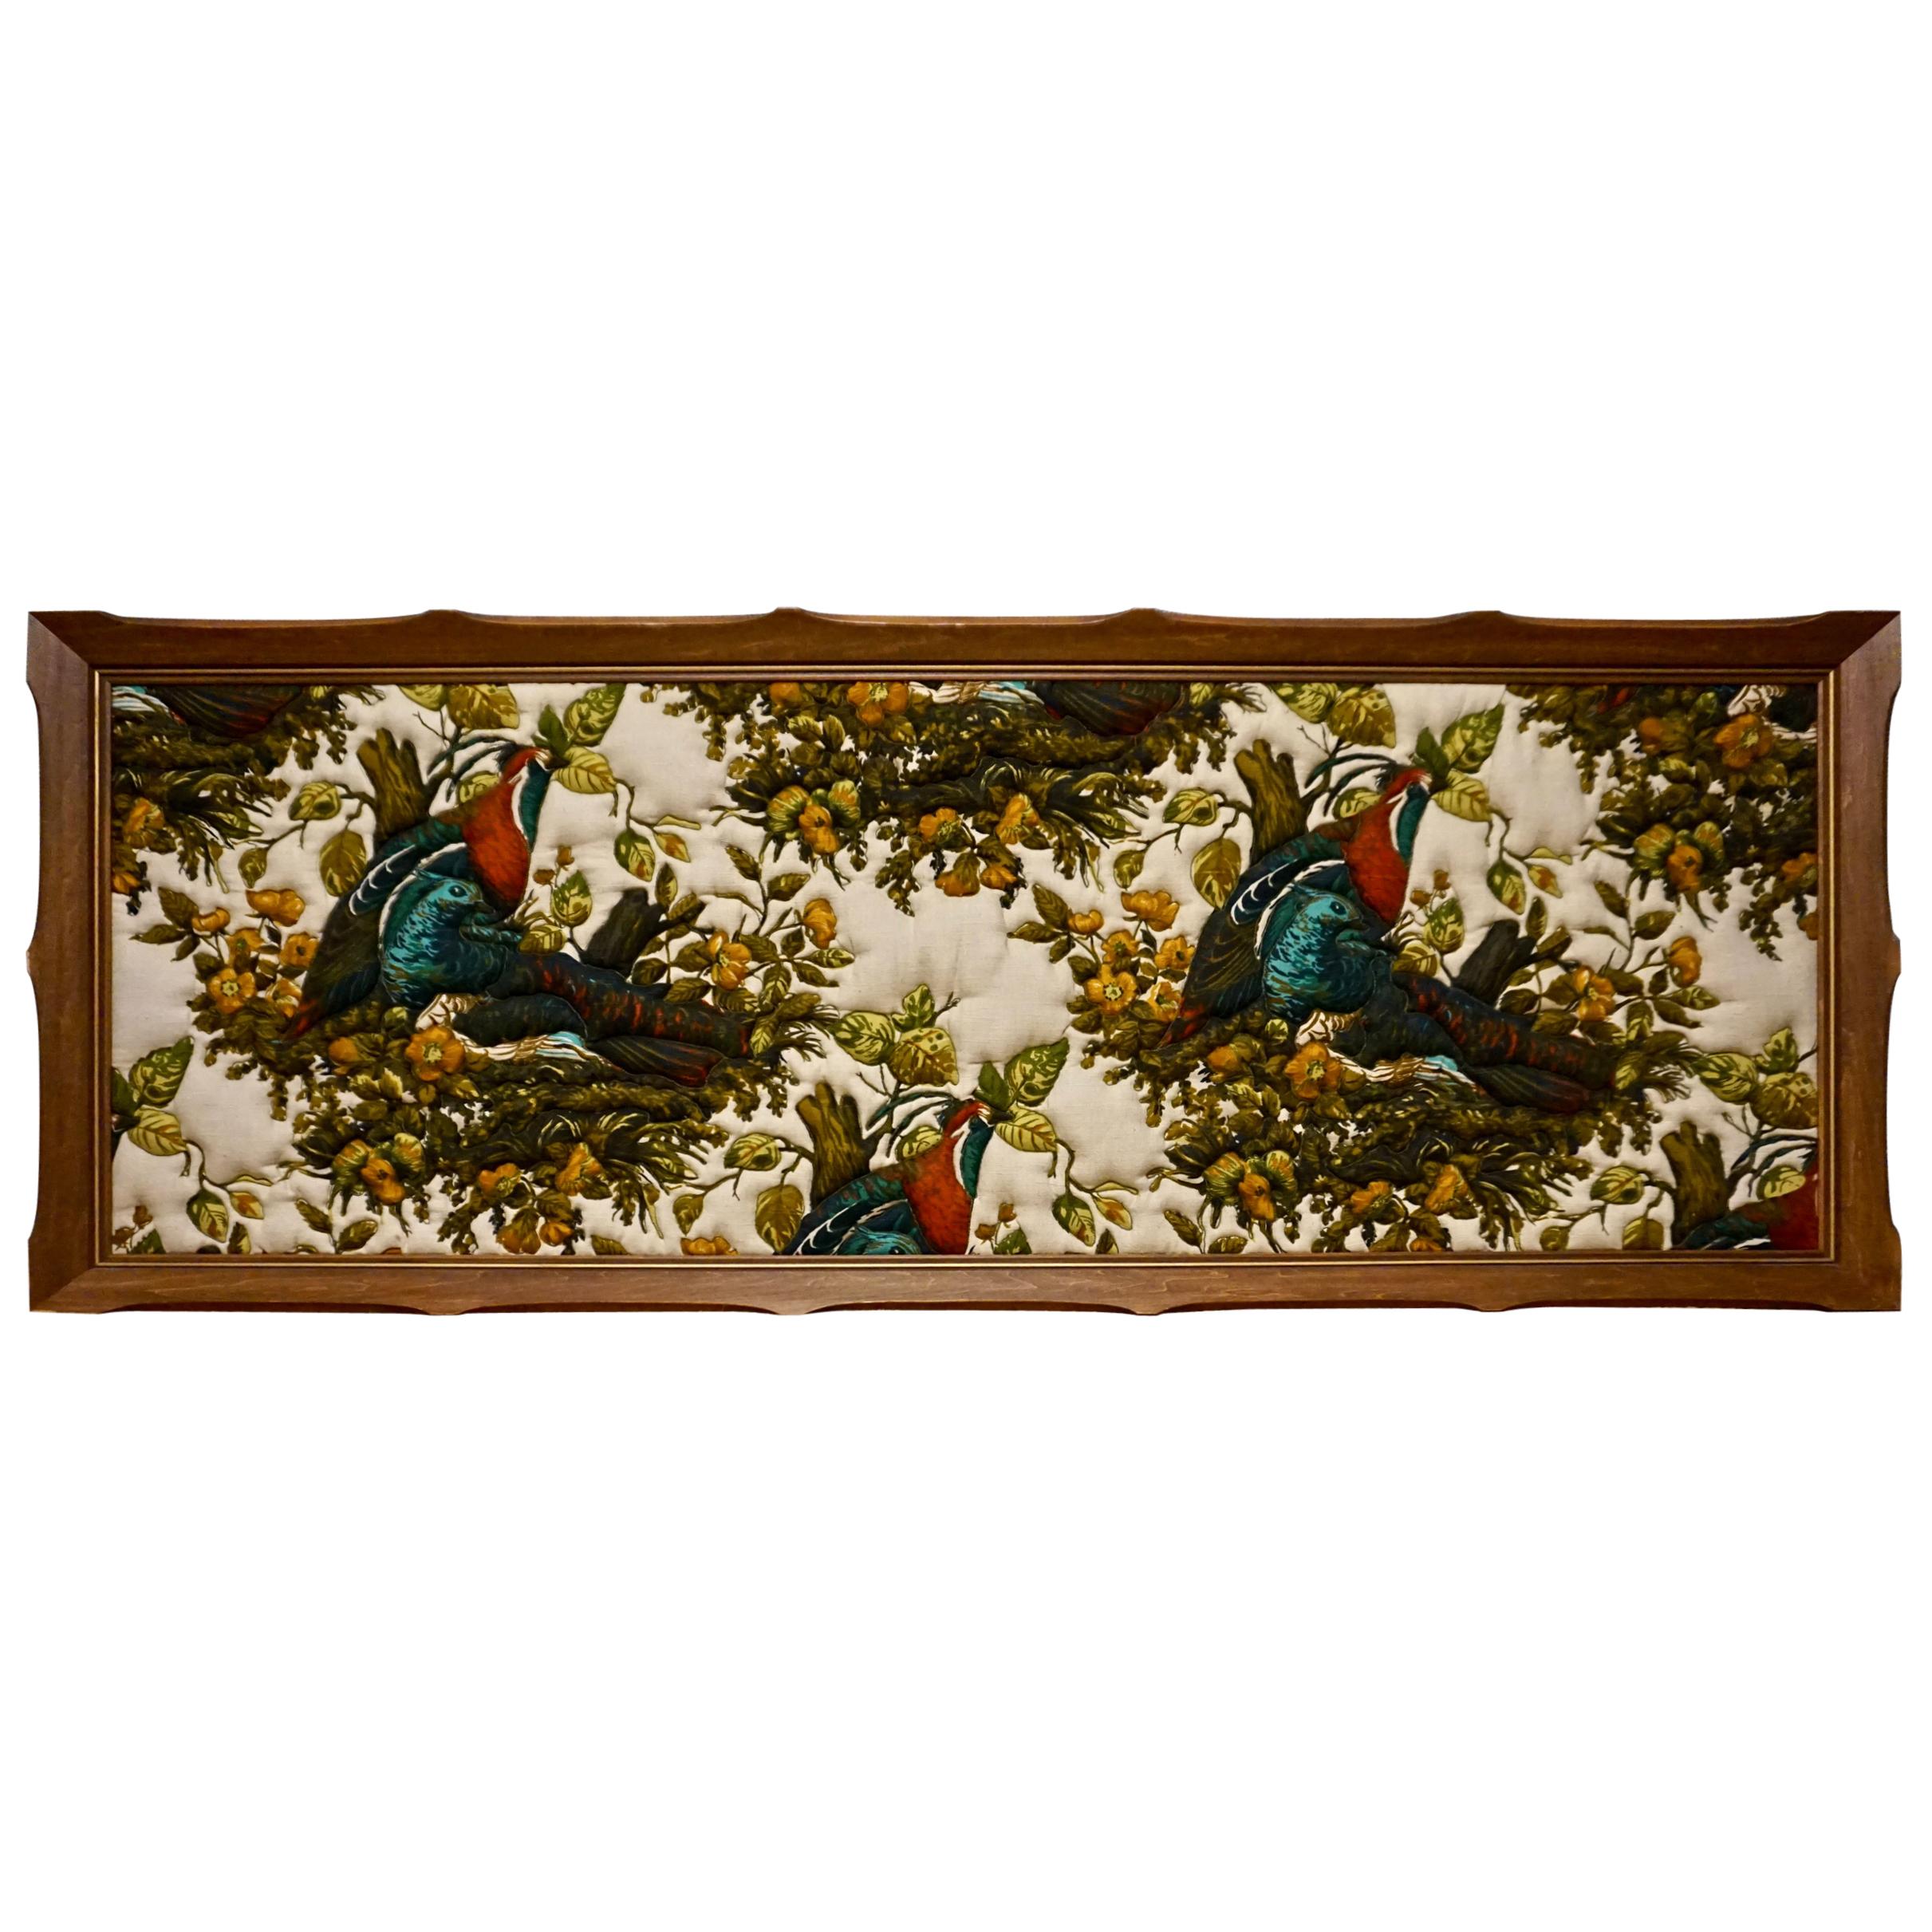 Imported Art Deco Quilted Pheasants on Canvas in Walnut Frame